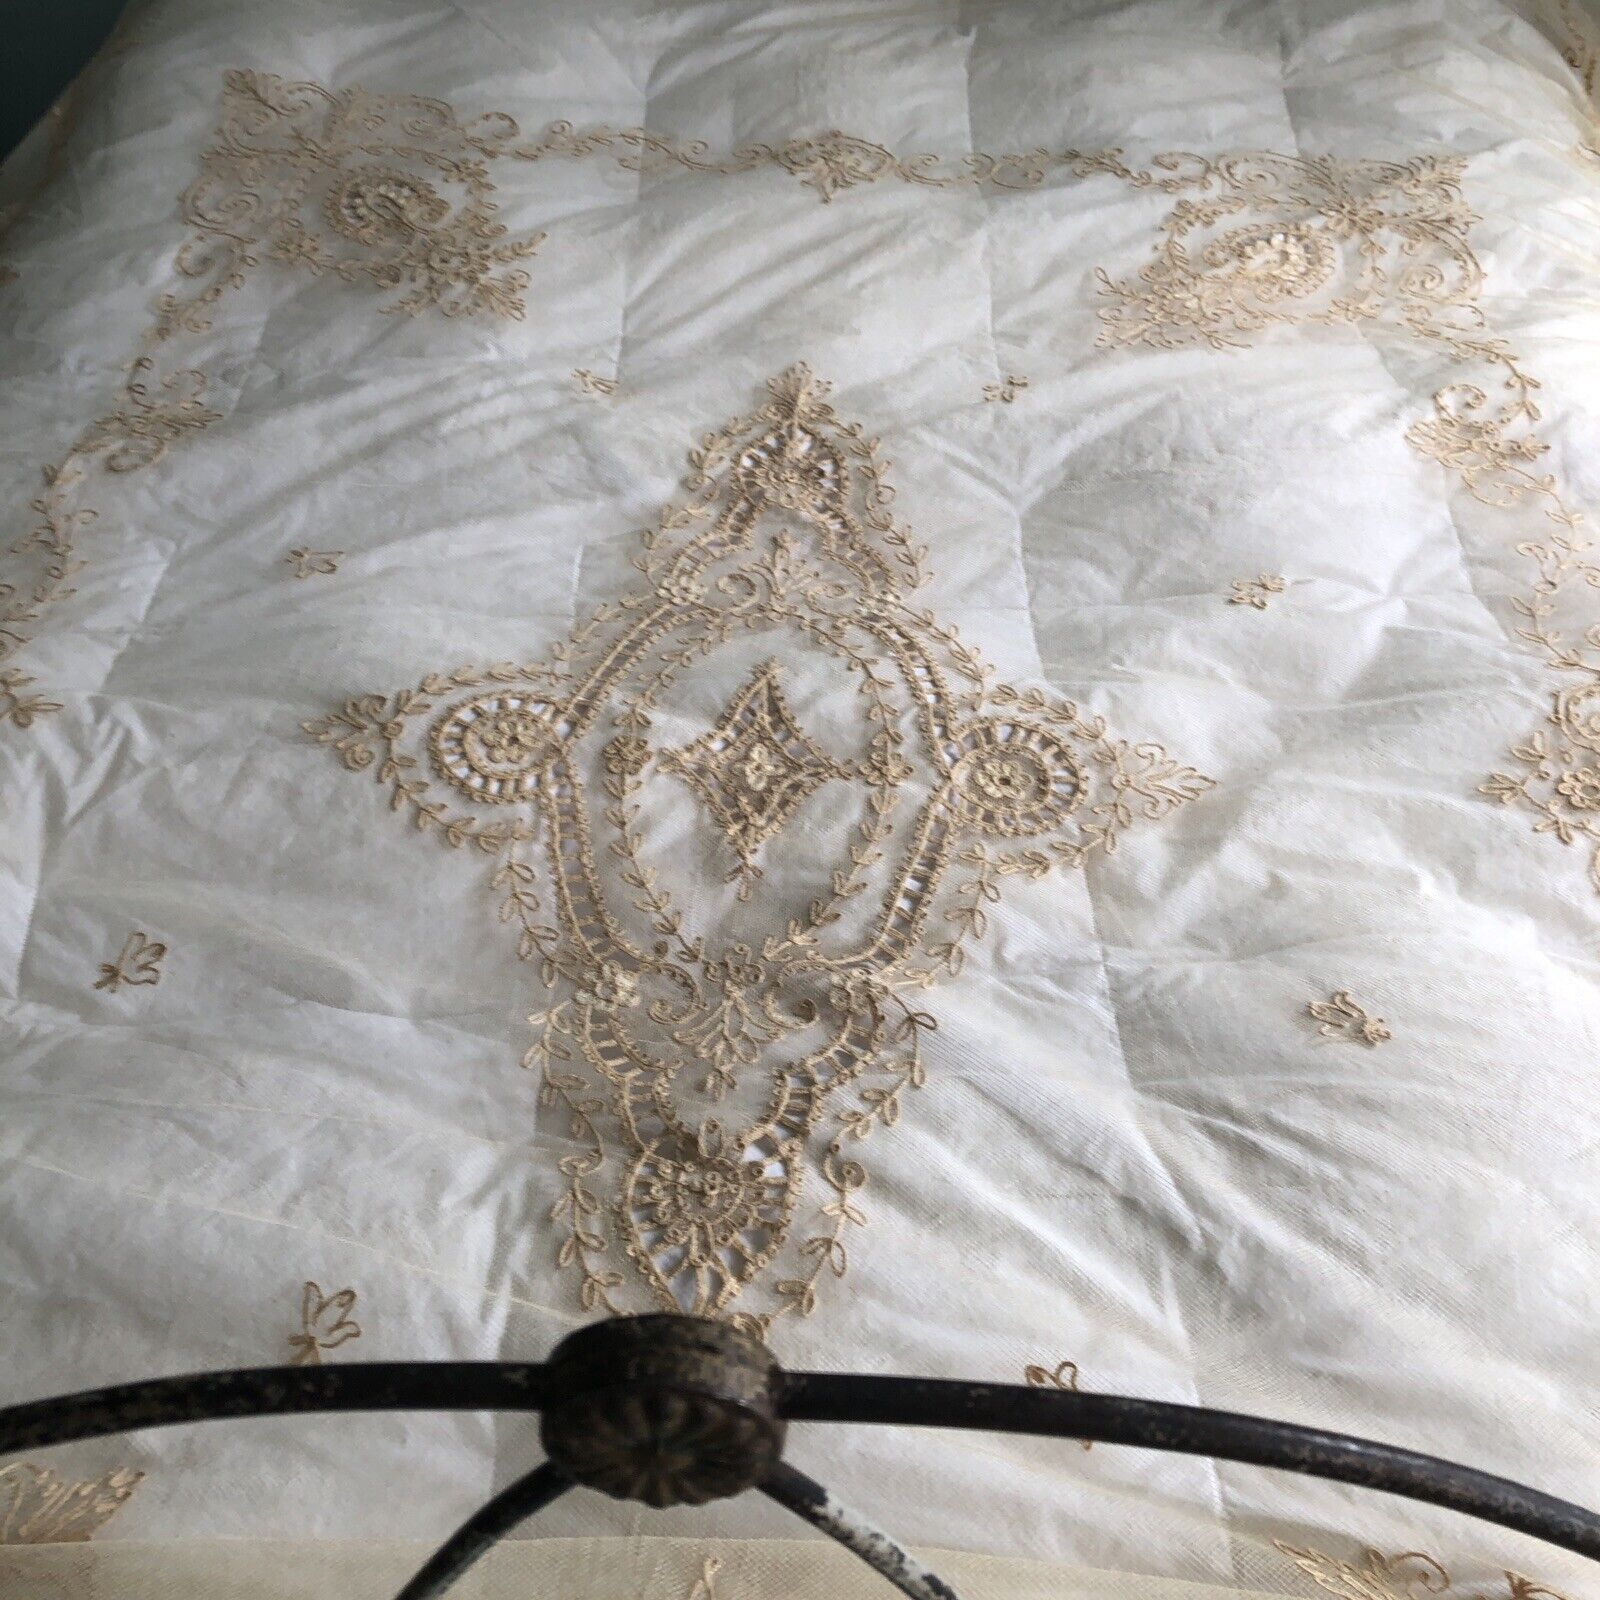 ANTIQUE Tambour Embroidered NET LACE Bedspread ~ BEAUTIFUL DETAIL Full Size